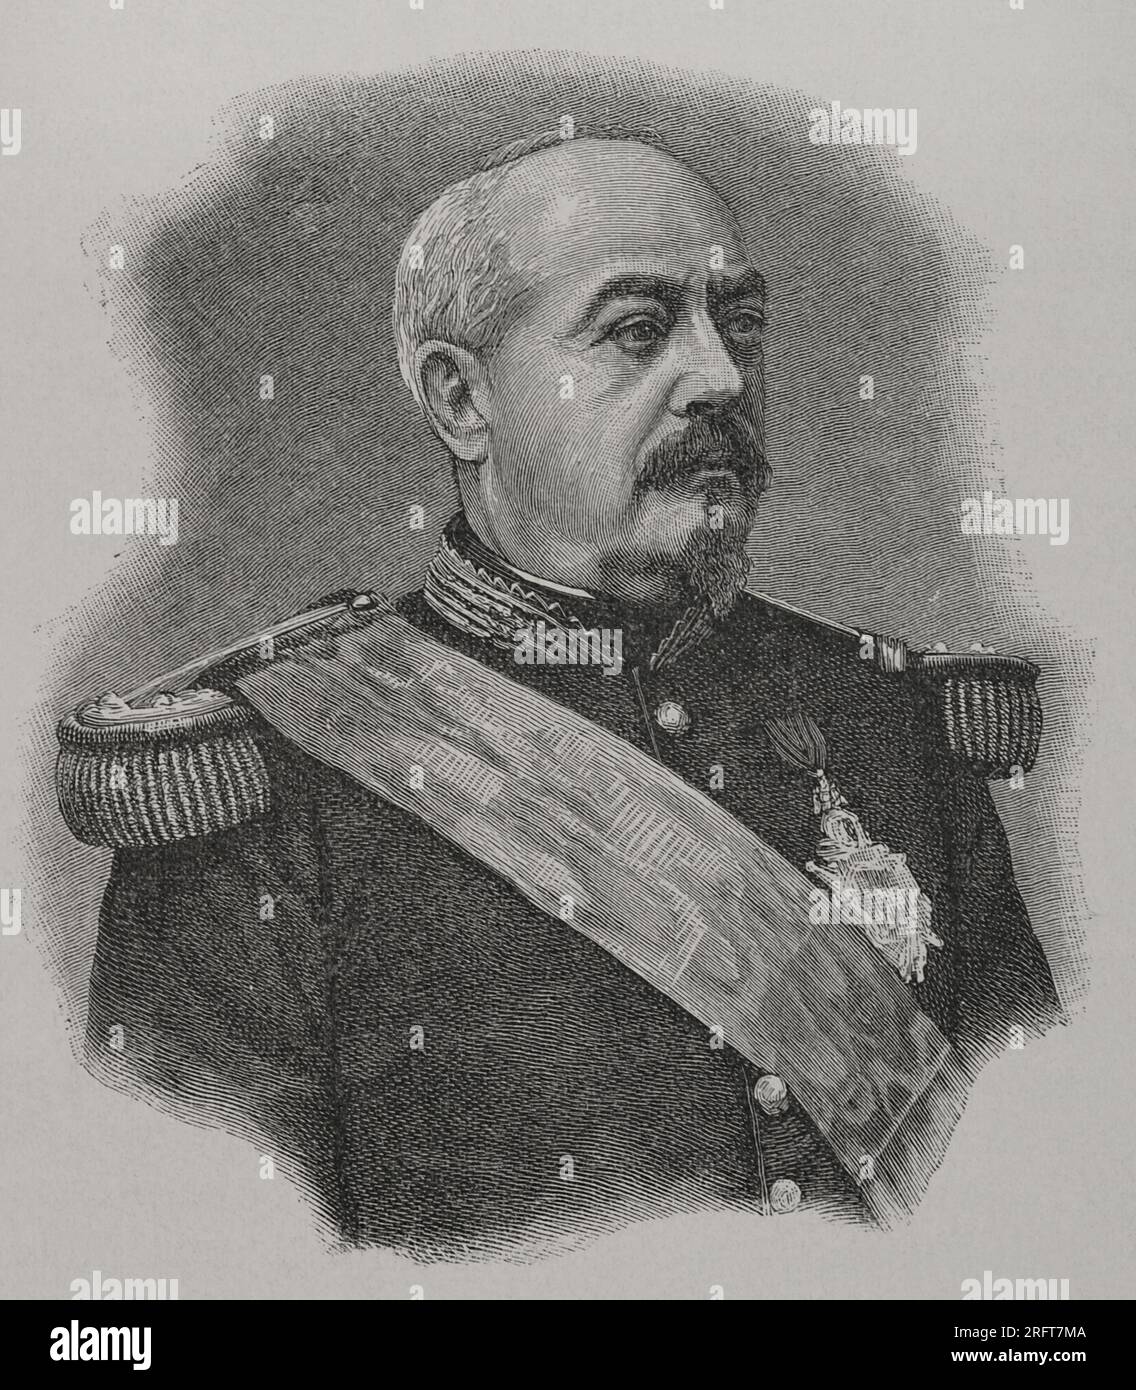 François Achille Bazaine (1811-1888). Marshal of France. He took part in the Algerian War, the Crimean War, the Second French Intervention in Mexico and the Franco-Prussian War. Portrait. Engraving. "Historia de la Guerra Franco-Alemana de of 1870-1871". Published in Barcelona, 1891. Stock Photo